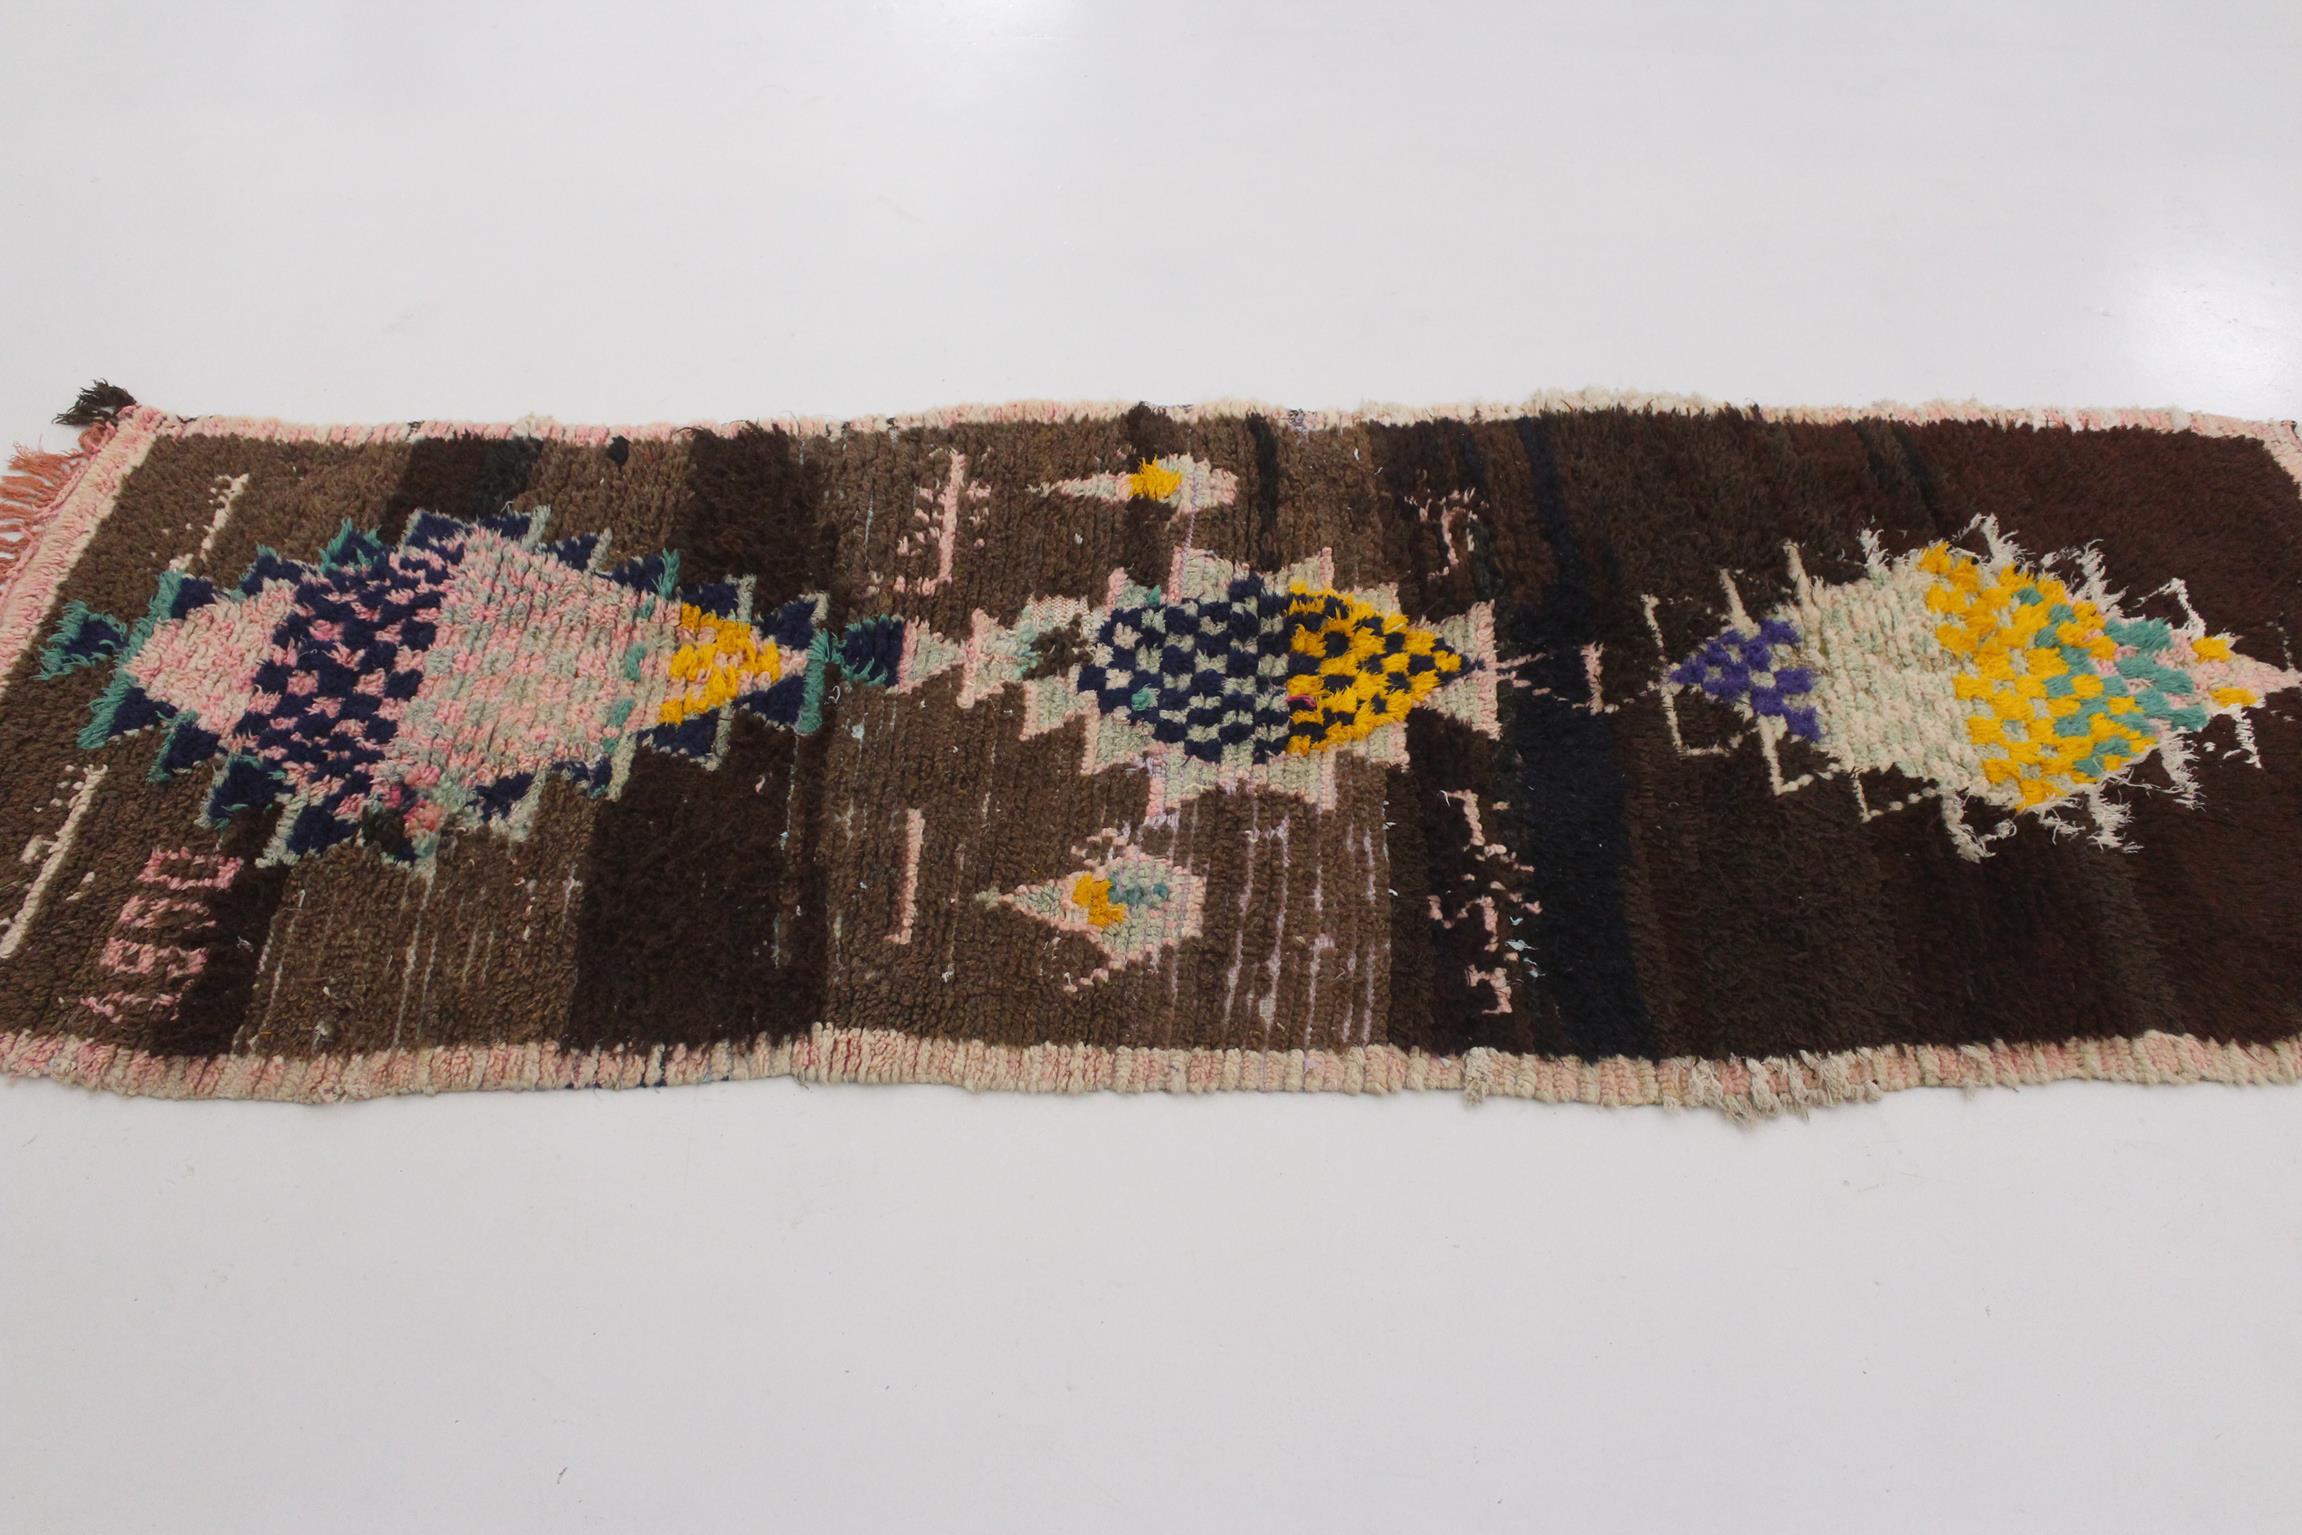 1990 vintage Moroccan Azilal runner rug - Brown/pink - 3x8.7feet / 93x265cm For Sale 1